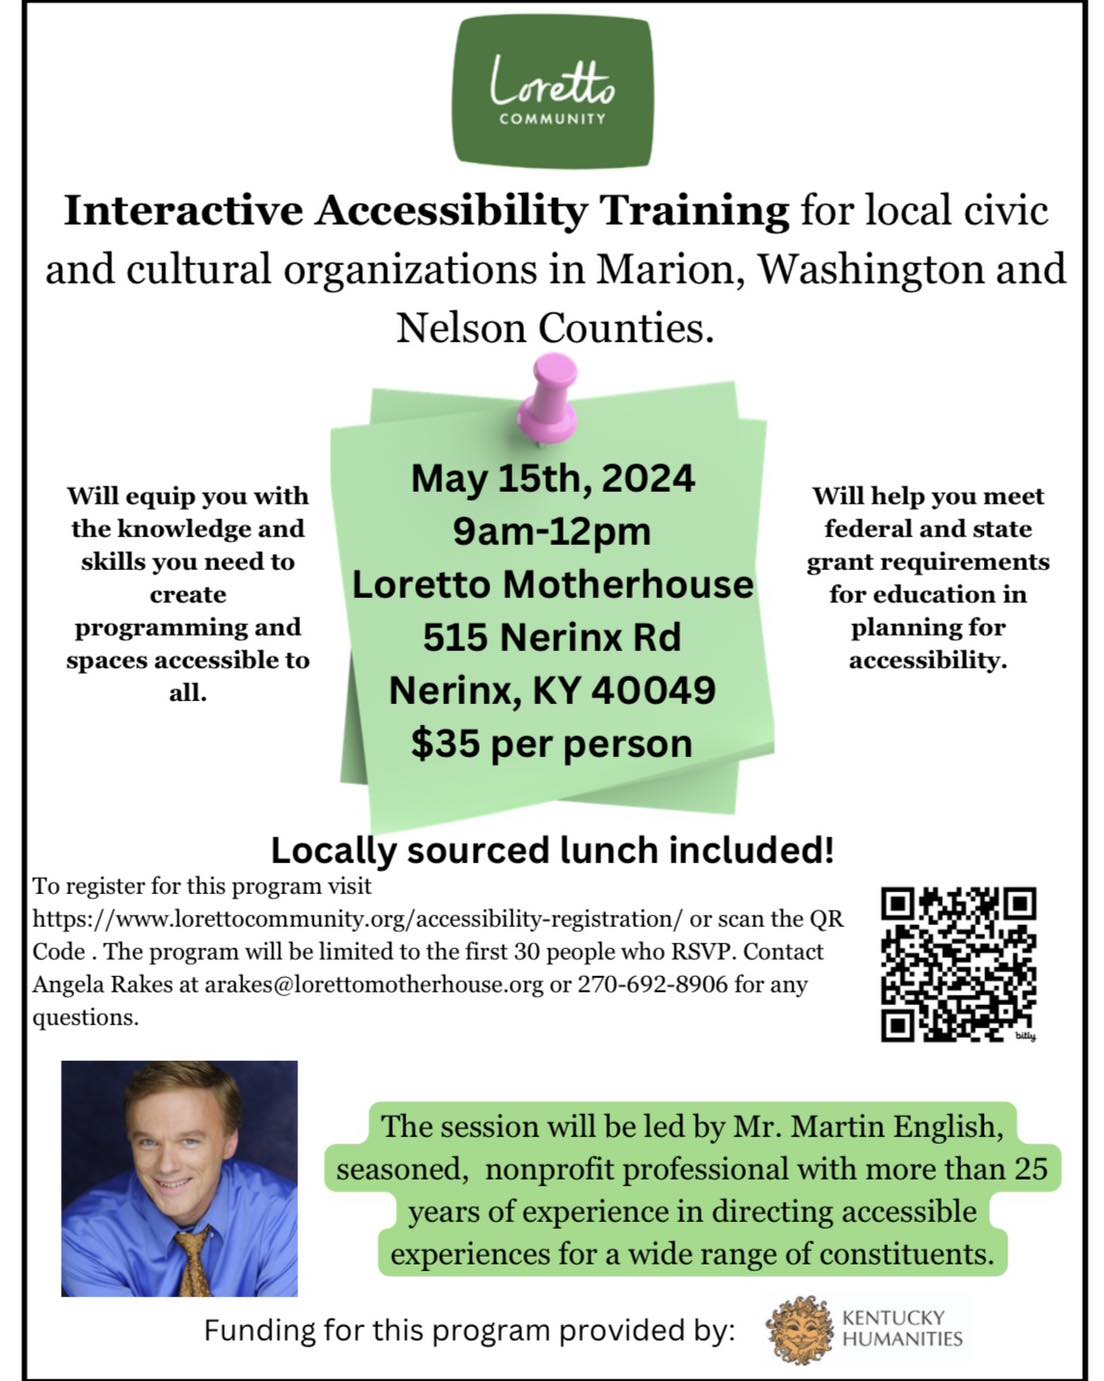 Interactive Accessibility Training